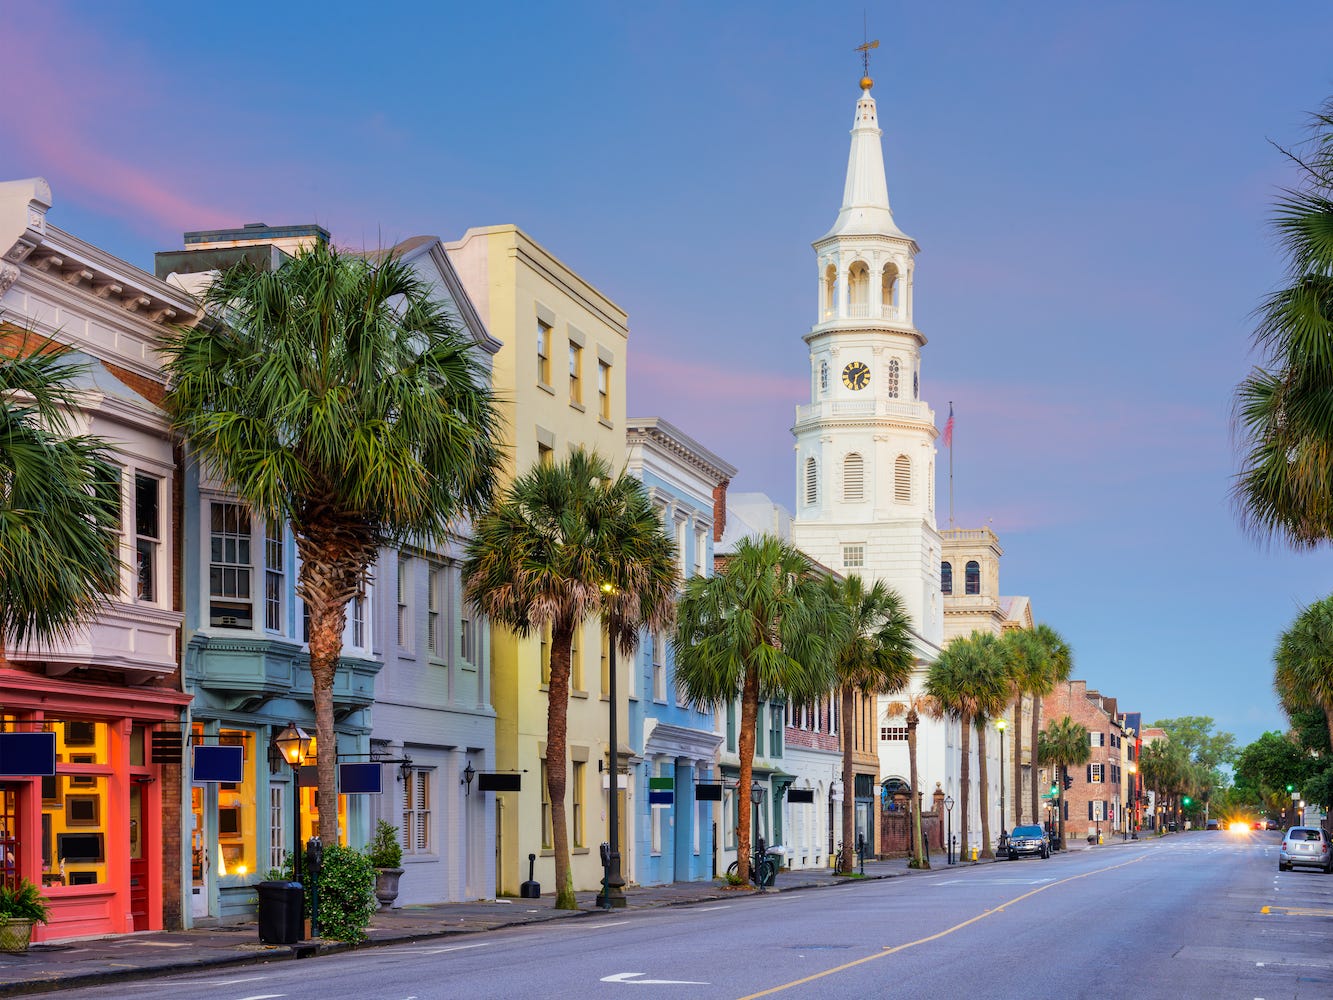 <p><a href="https://www.travelandleisure.com/worlds-best/the-best-cities-in-the-world-2022">Travel + Leisure</a> named Charleston the 23rd best city in the world in 2022. In 2016, <a href="https://www.charlestoncvb.com/blog/worlds-best#:~:text=We%20are%20thrilled%20to%20share,have%20voted%20Charleston%20the%20No.">it took the No. 1 spot</a>. </p><p>With colorful houses lining its streets and tons of beautiful settings for outdoor recreation, it's a well-deserved honor.</p>